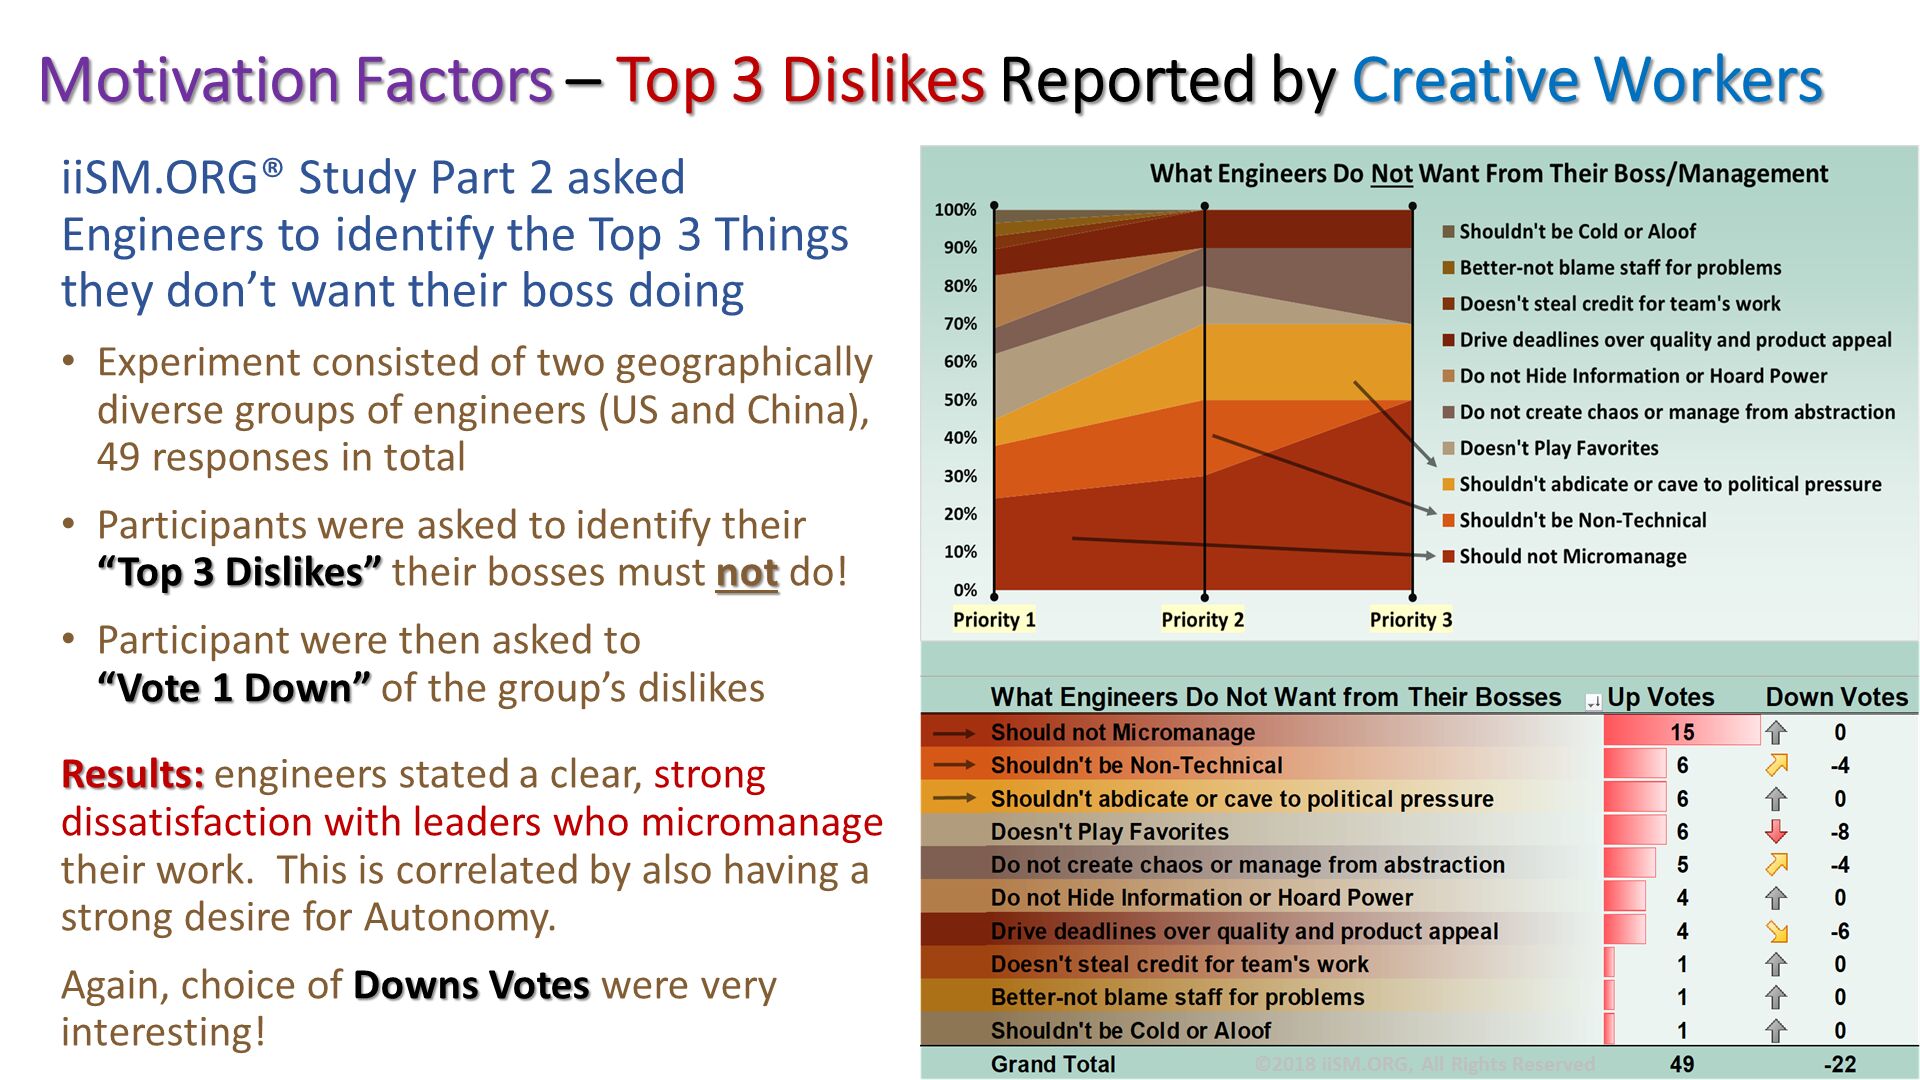 iiSM.ORG® Study Part 2 asked Engineers to identify the Top 3 Things they don’t want their boss doing  
Experiment consisted of two geographically diverse groups of engineers (US and China),49 responses in total
Participants were asked to identify their “Top 3 Dislikes” their bosses must not do!
Participant were then asked to “Vote 1 Down” of the group’s dislikes
Results: engineers stated a clear, strong dissatisfaction with leaders who micromanage their work.  This is correlated by also having a strong desire for Autonomy.
Again, choice of Downs Votes were very interesting!. Motivation Factors – Top 3 Dislikes Reported by Creative Workers. ©2018 iiSM.ORG, All Rights Reserved. 